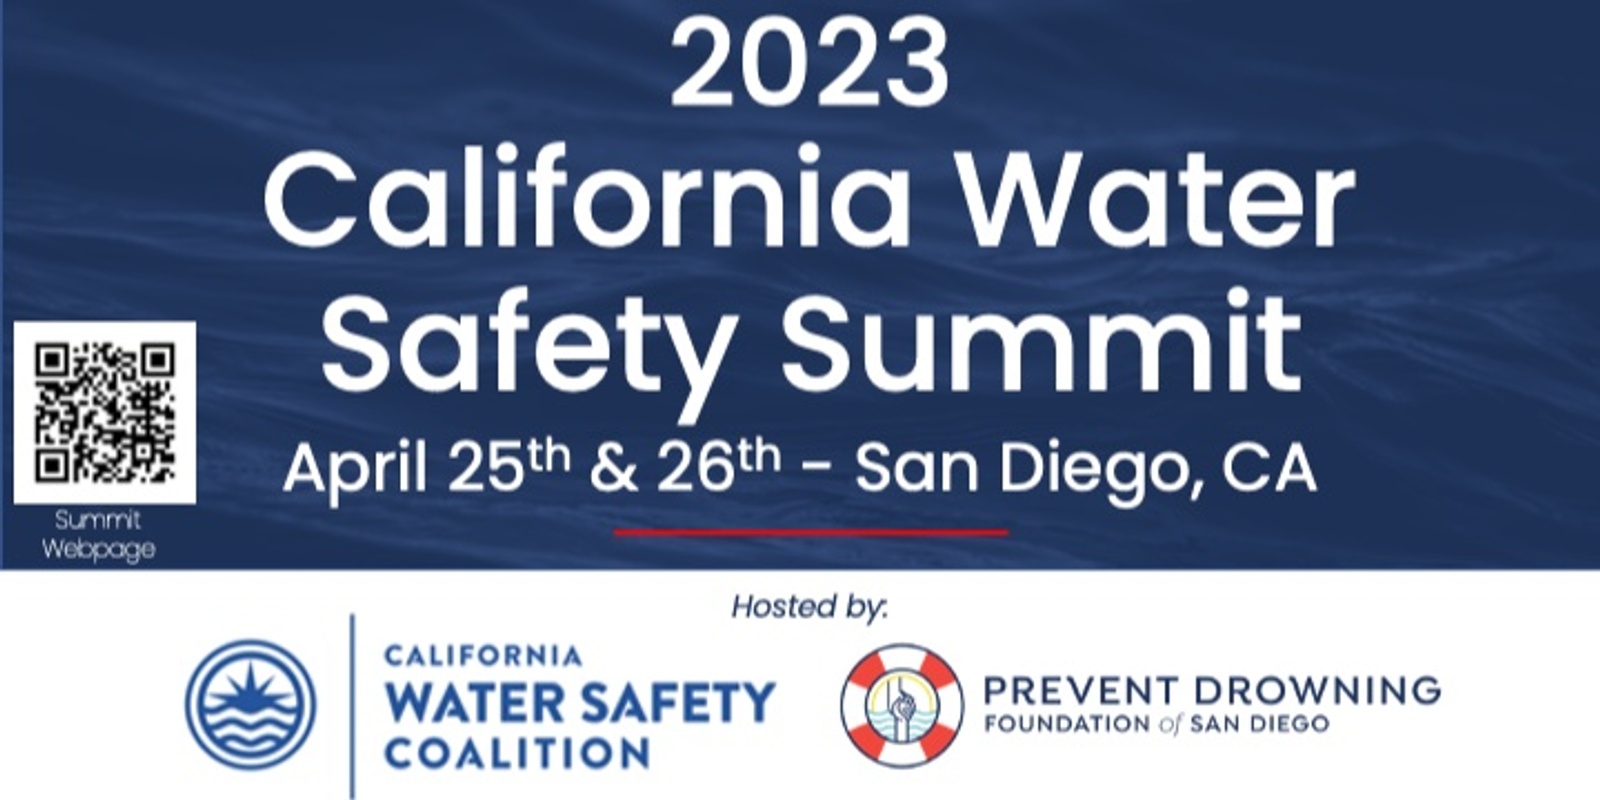 Banner image for 2023 CALIFORNIA WATER SAFETY SUMMIT